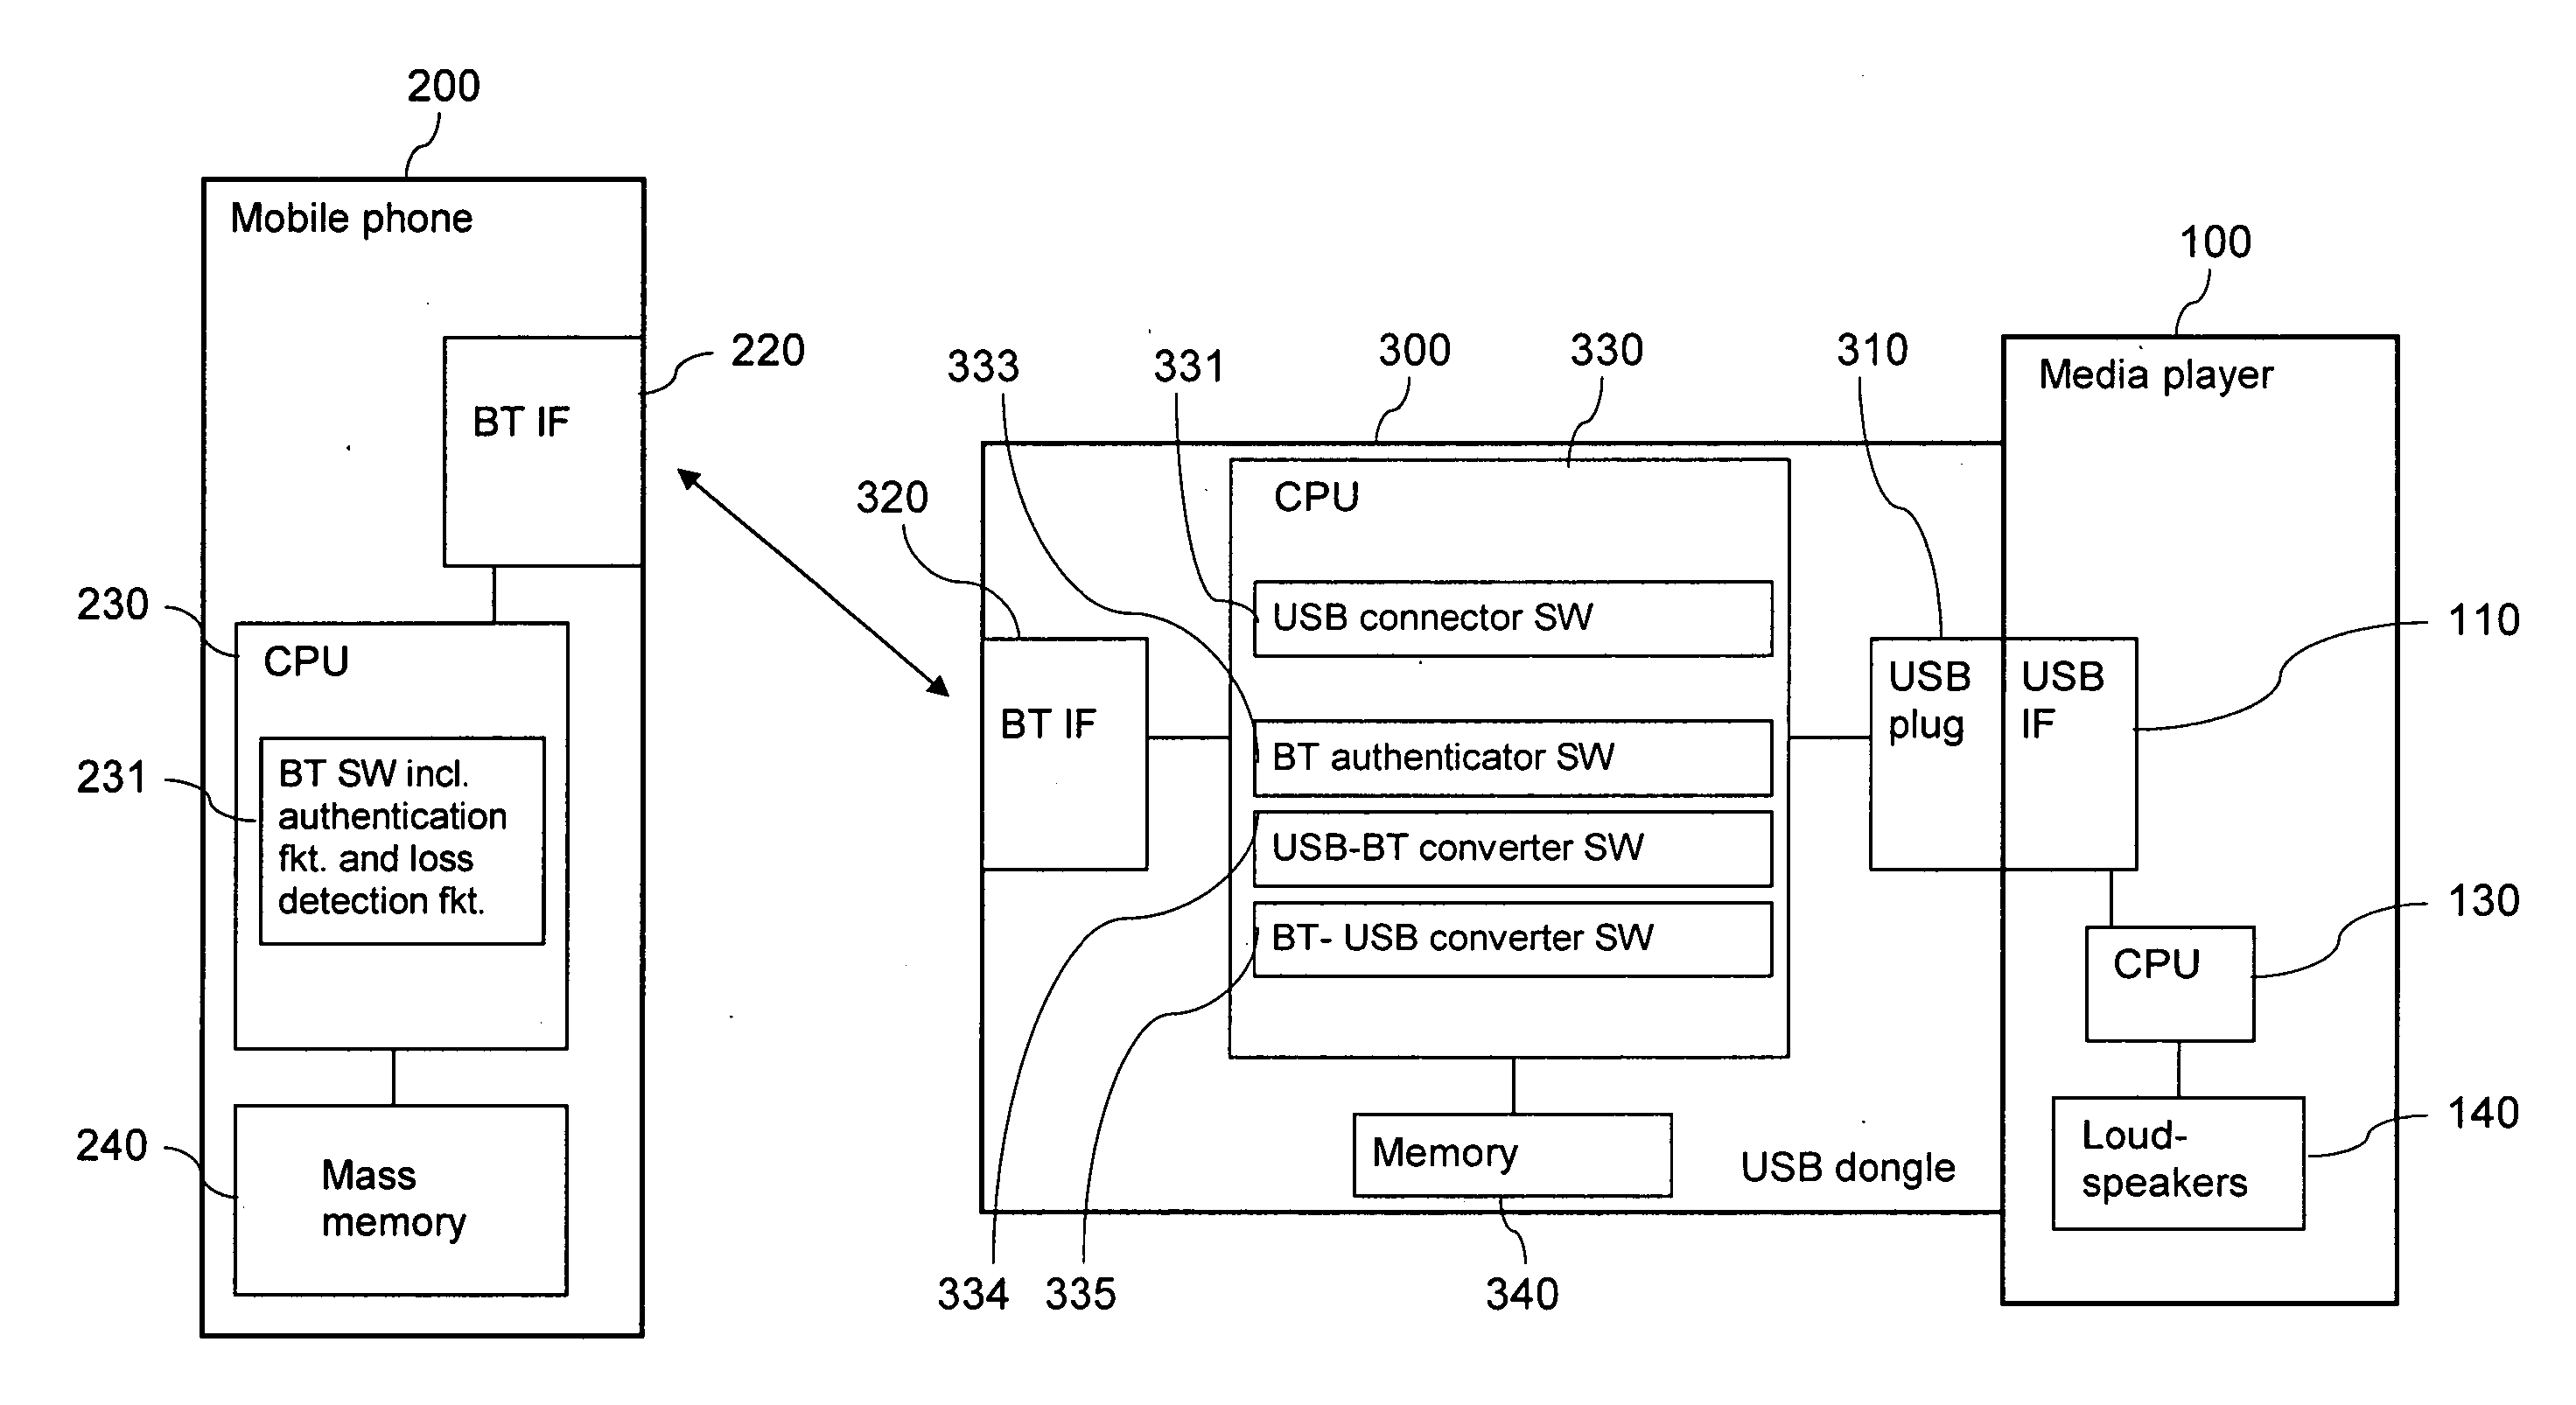 Supporting use of connection via electrical interface